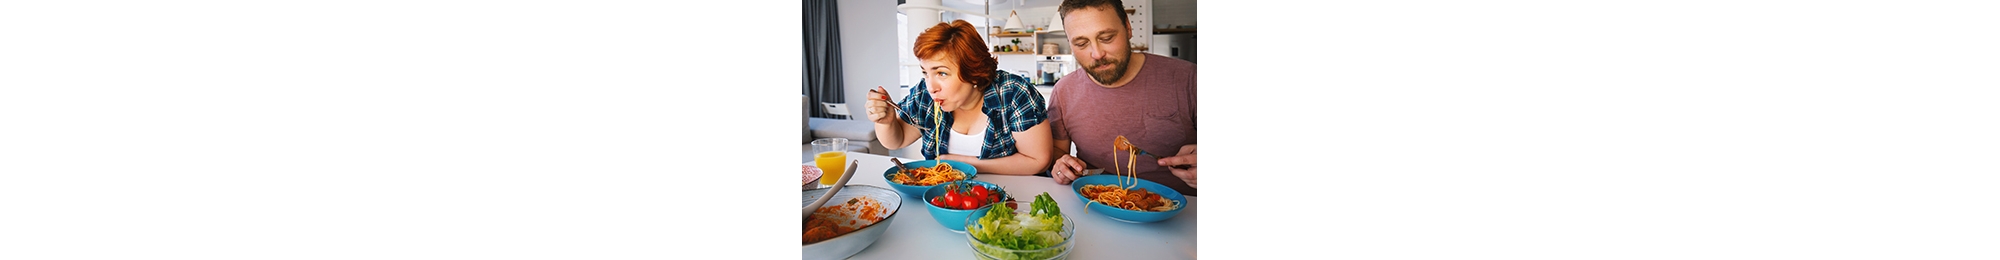 Overweight mid adult couple eating lunch at home.